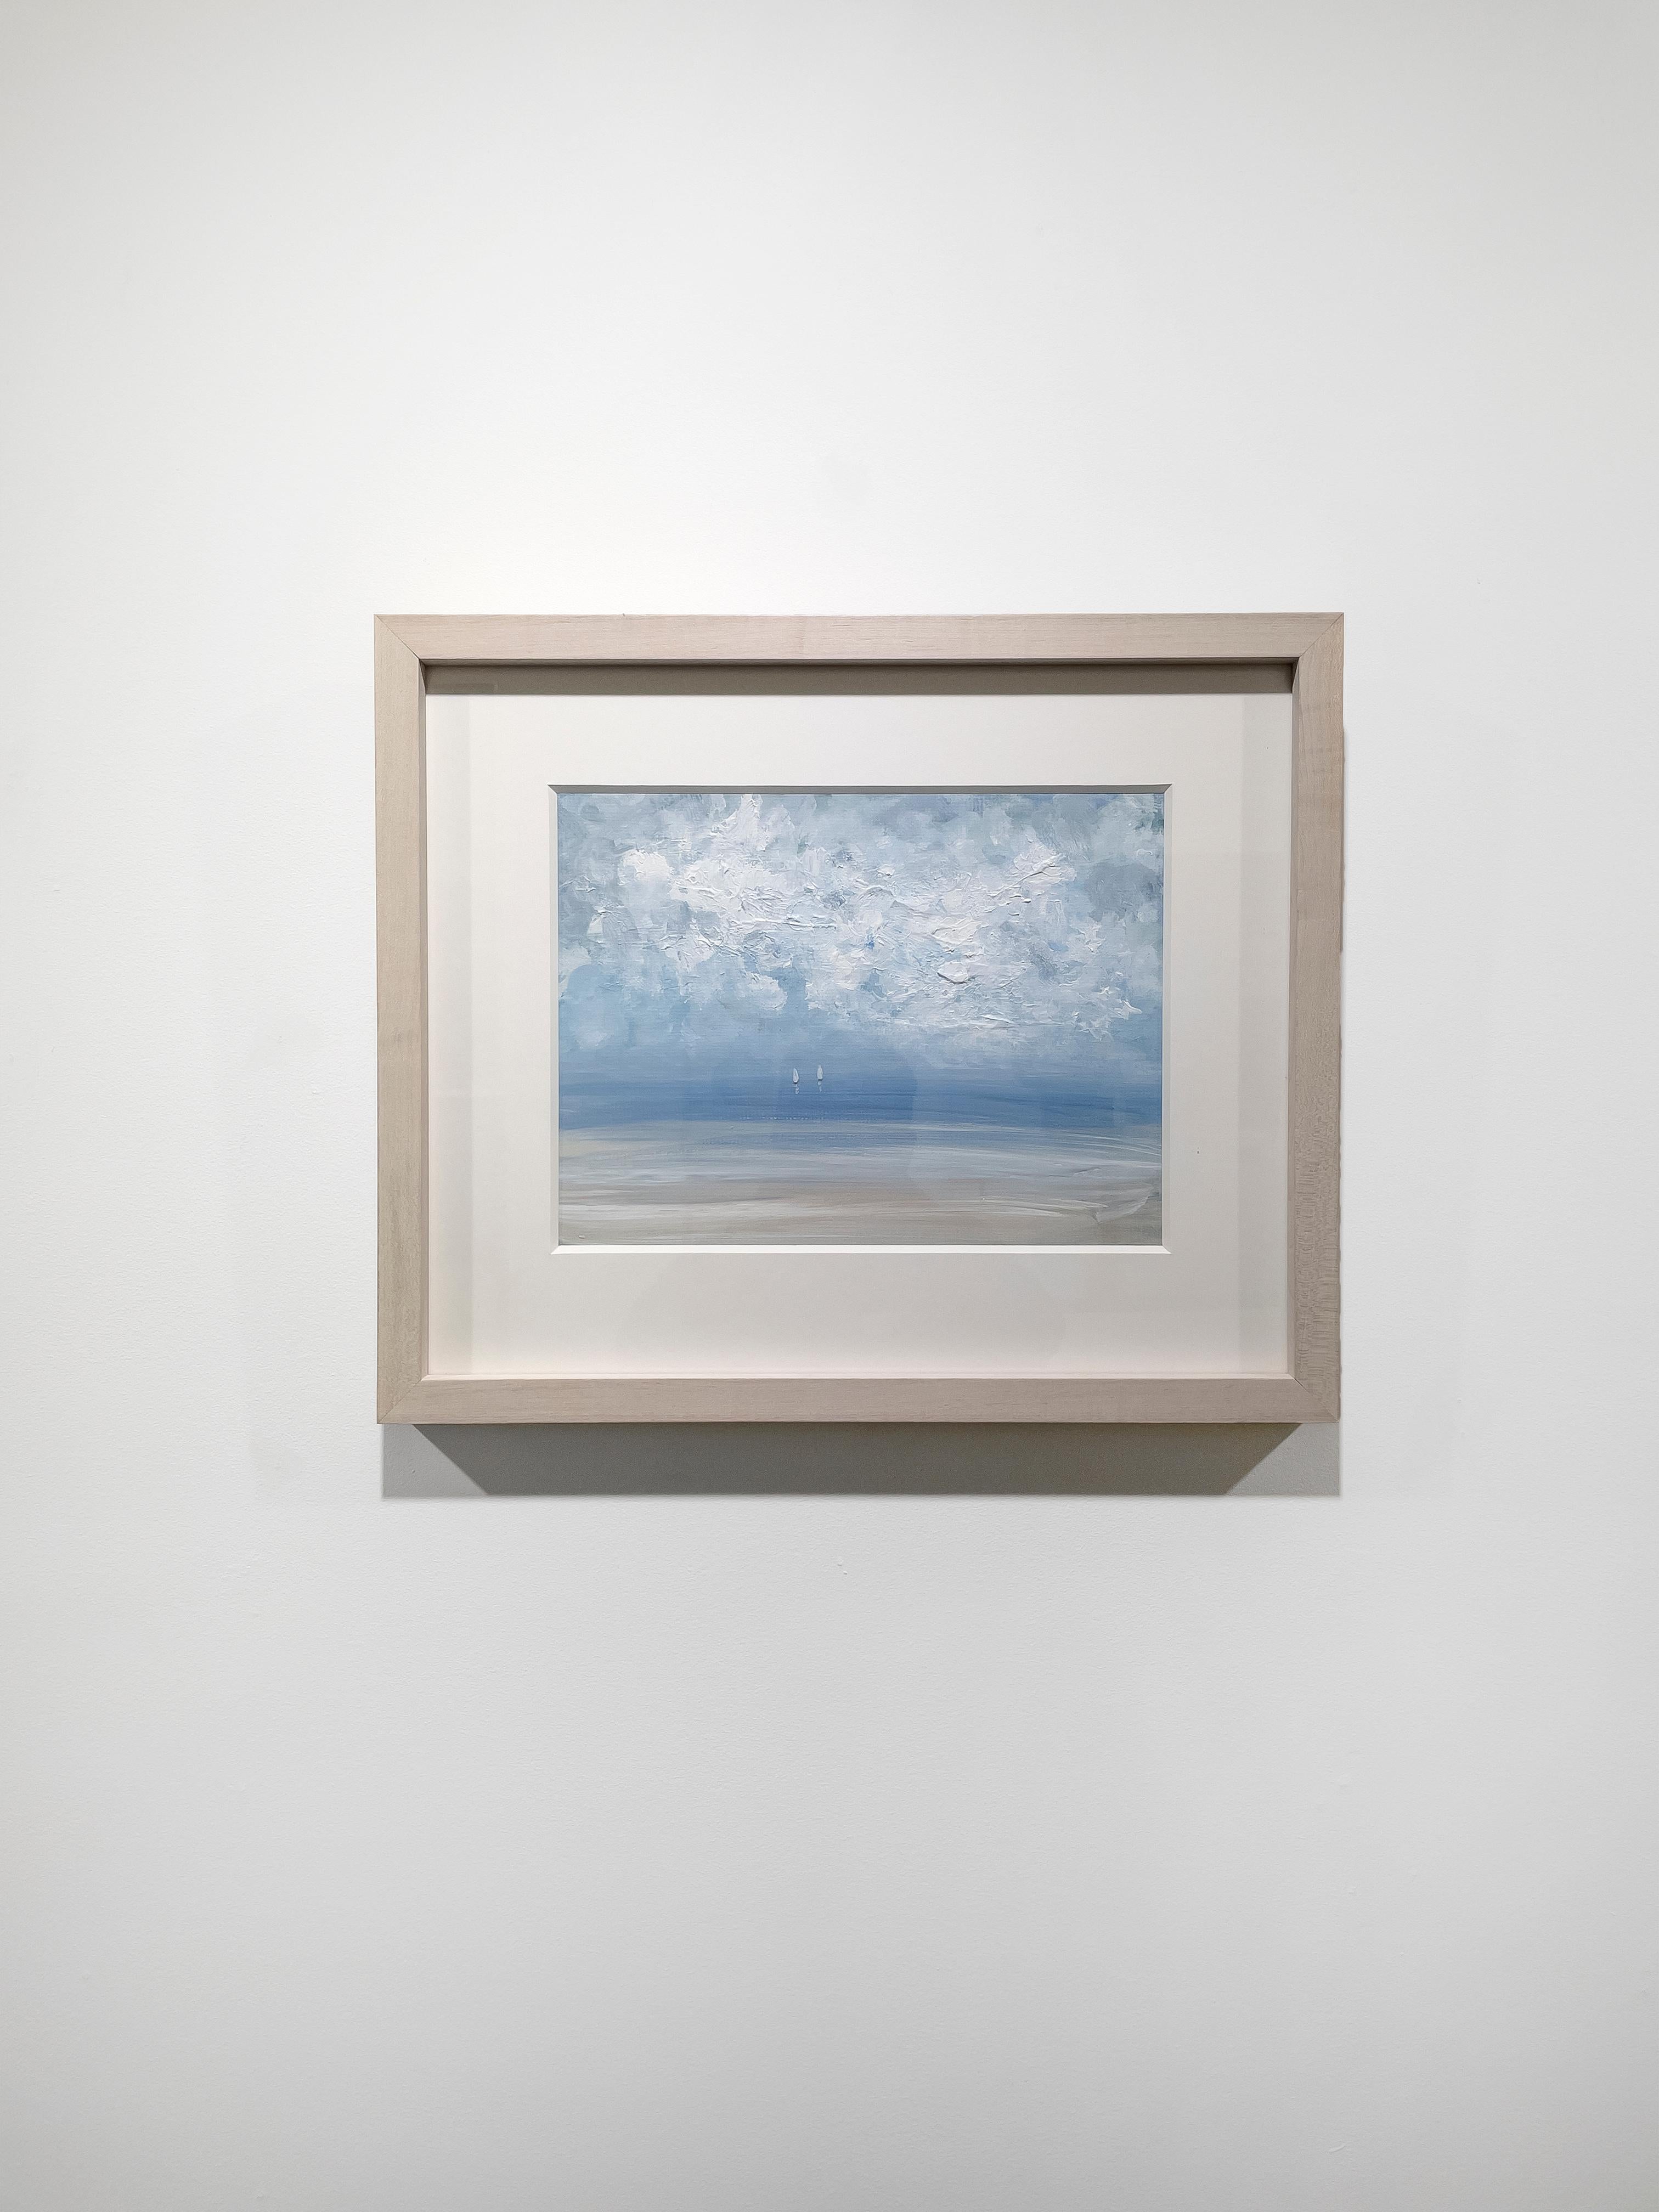 This contemporary seascape painting by S.C. Aldo is made with acrylic paint on Arches paper. It depicts a lightly abstracted coastal scene with a light blue sky, textured abstract clouds and two small white sailboats sailing near the horizon,